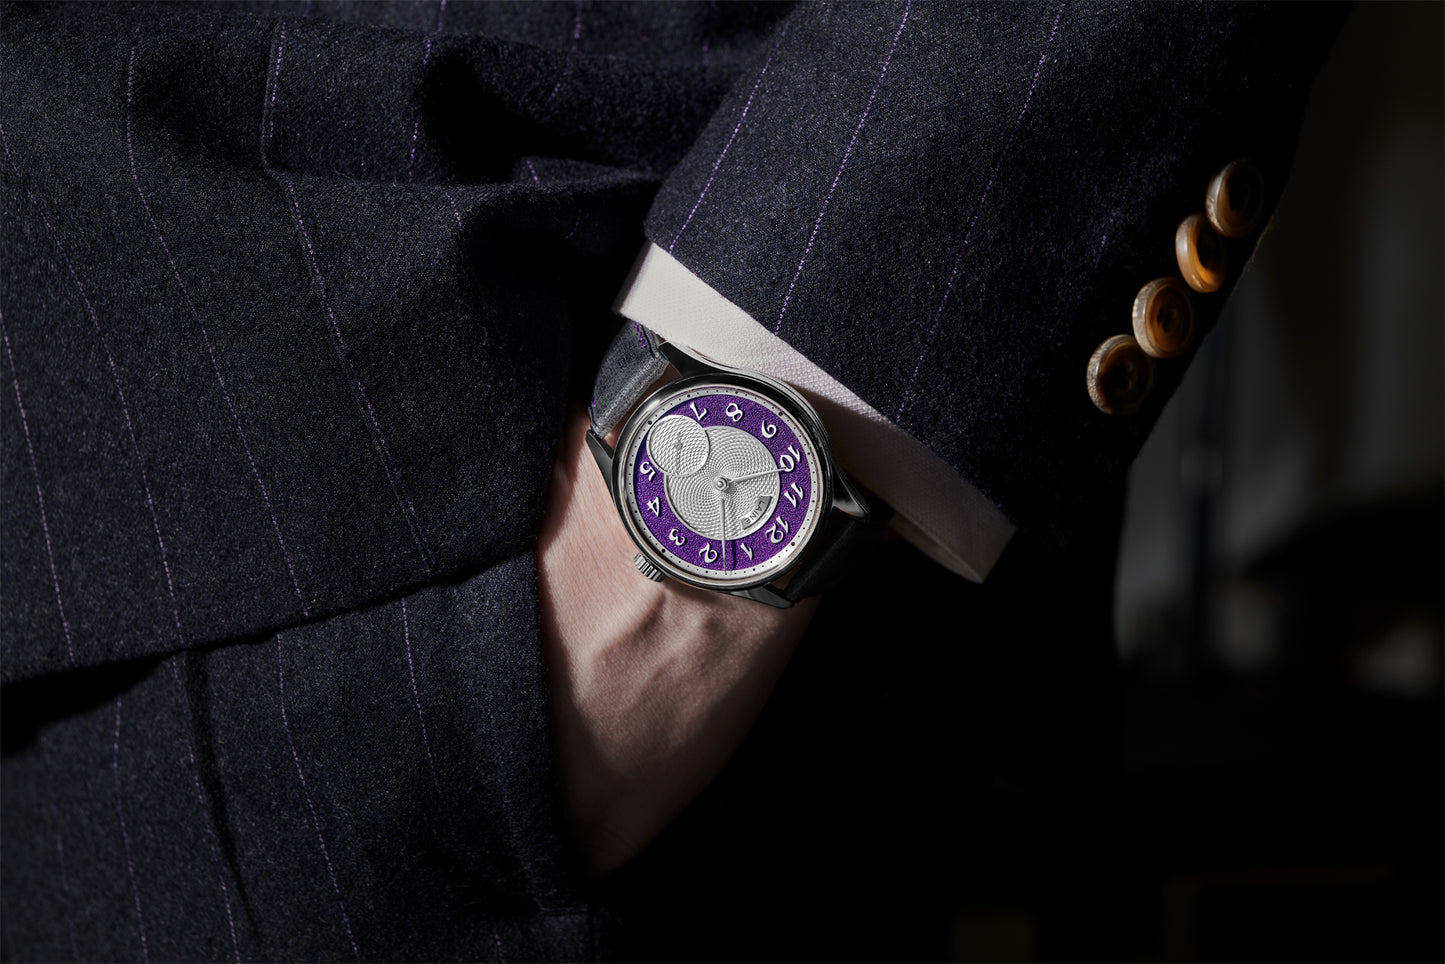 Laine x Revolution Purple Dial Frosted with Guilloché Center "One Love" (Breguet)